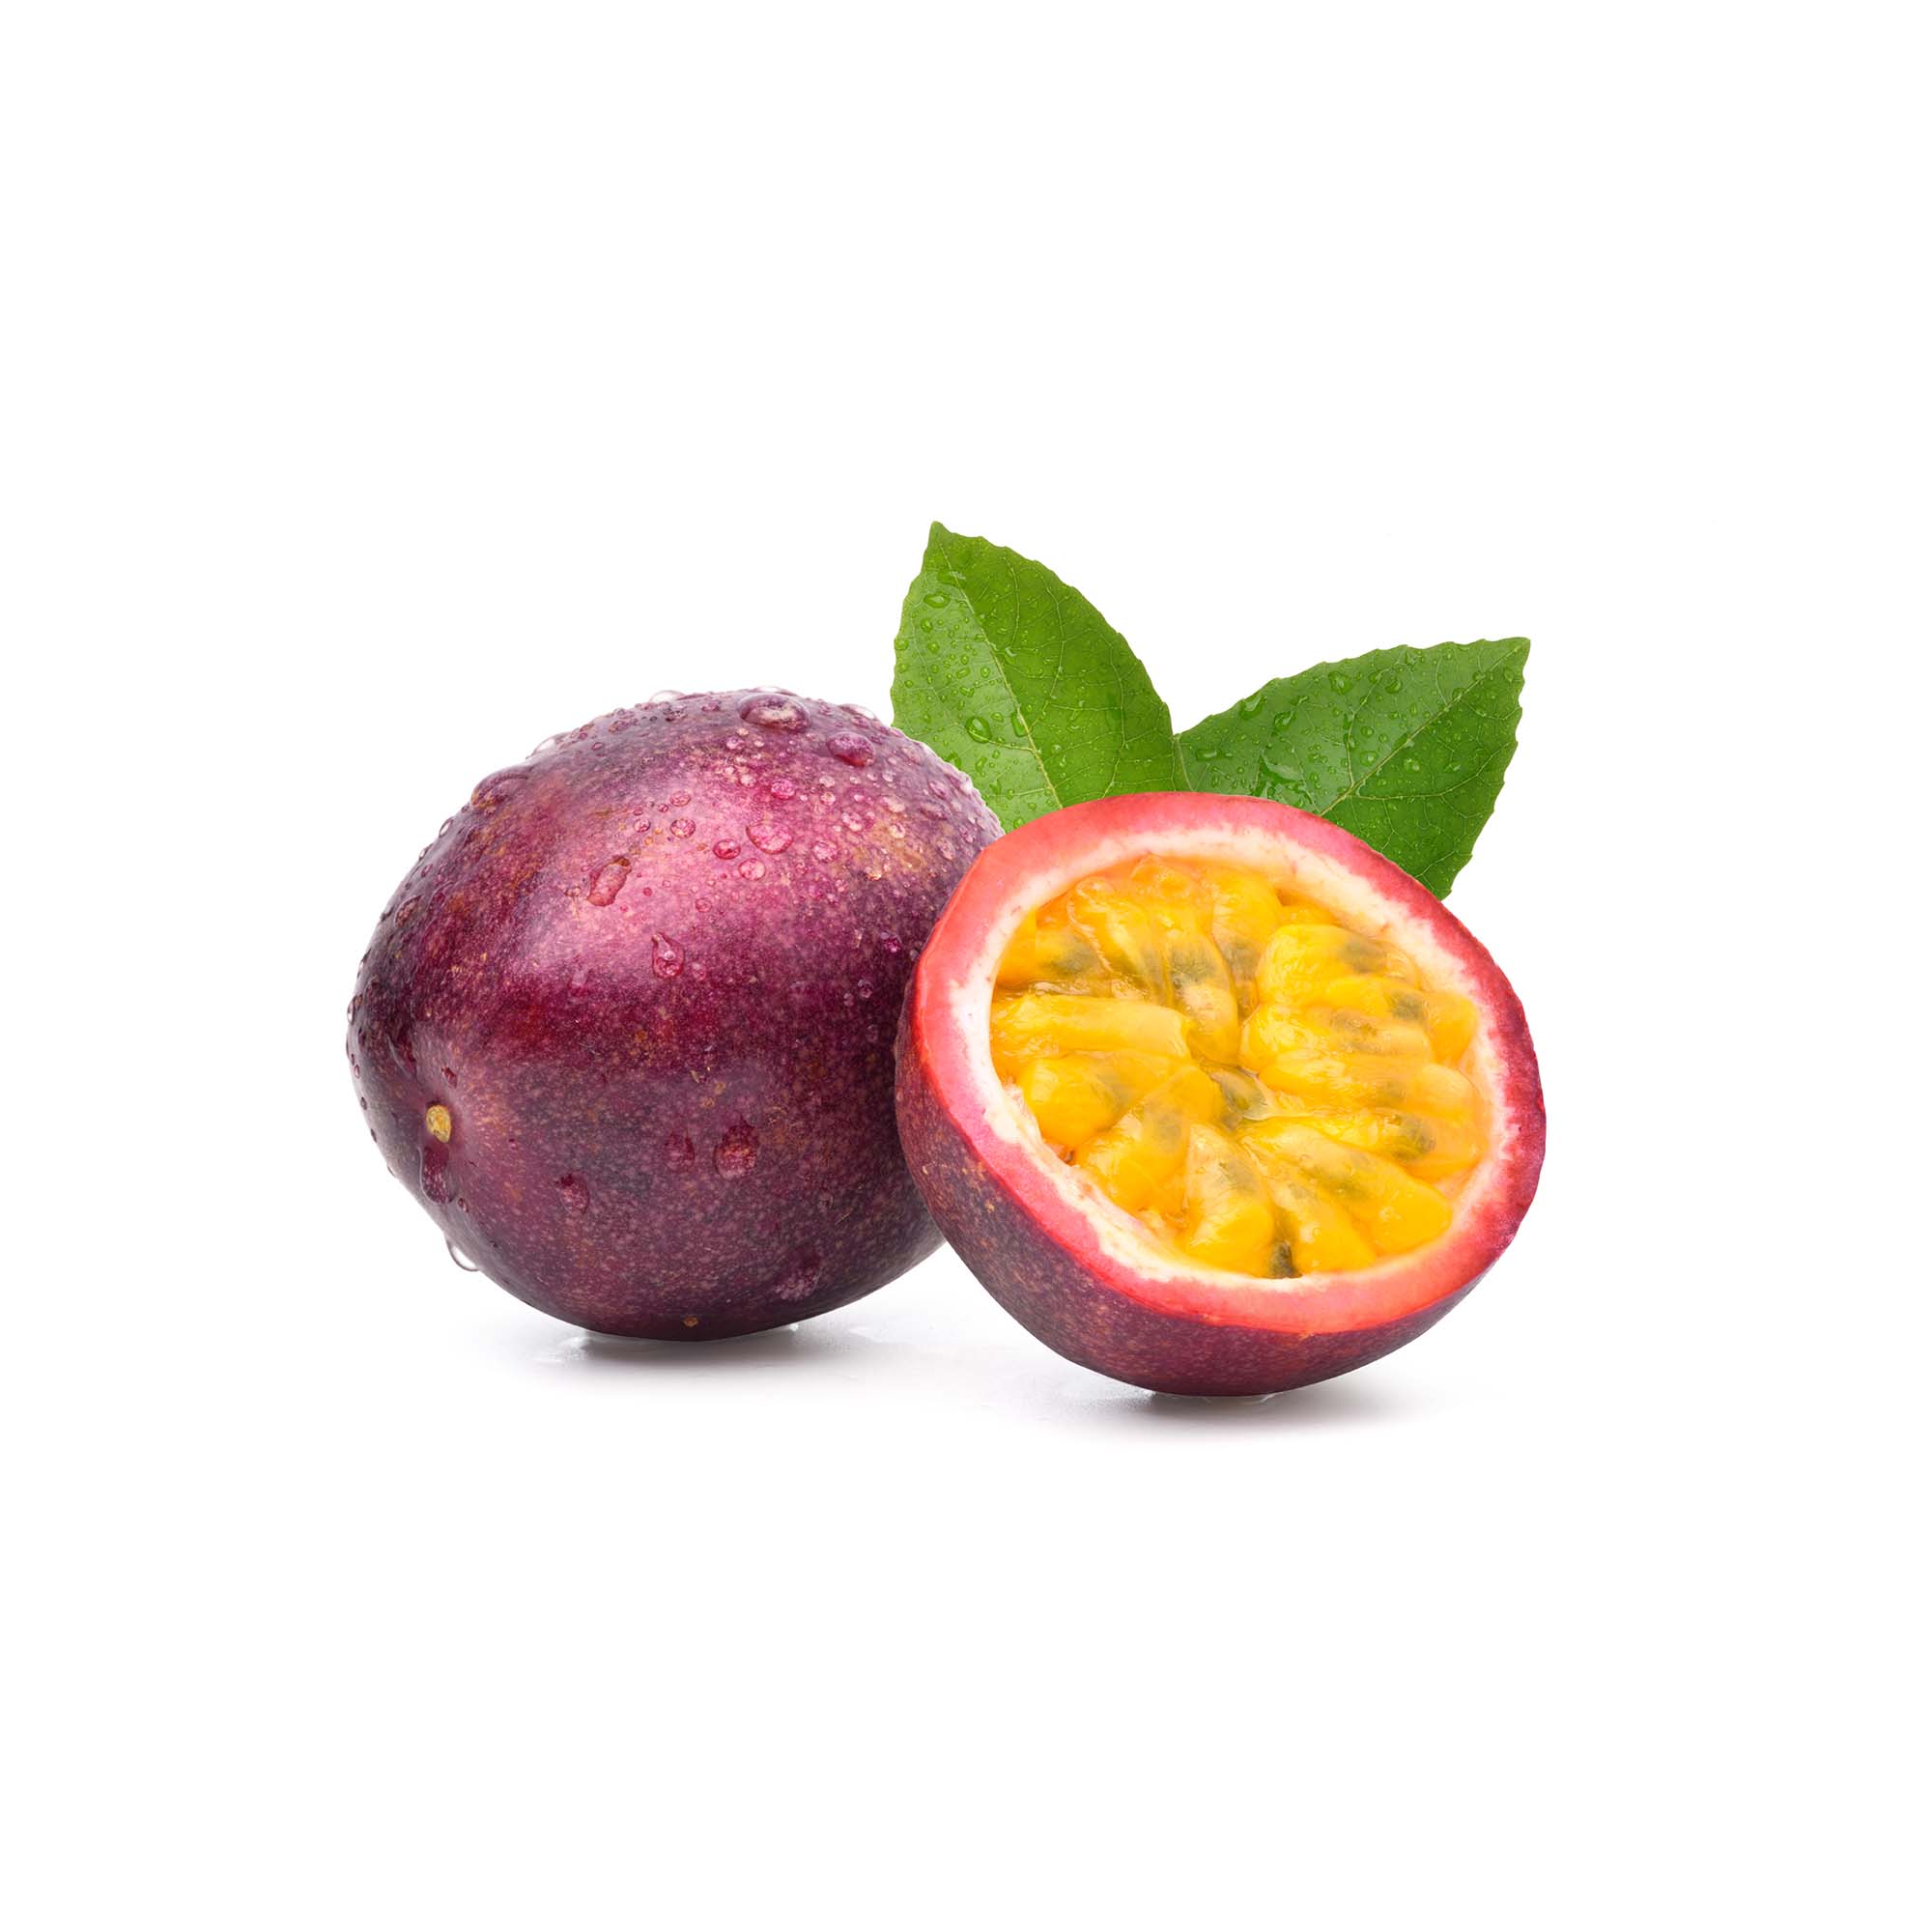 Passion Fruit 101: Buying, Eating, Health Benefits and More!